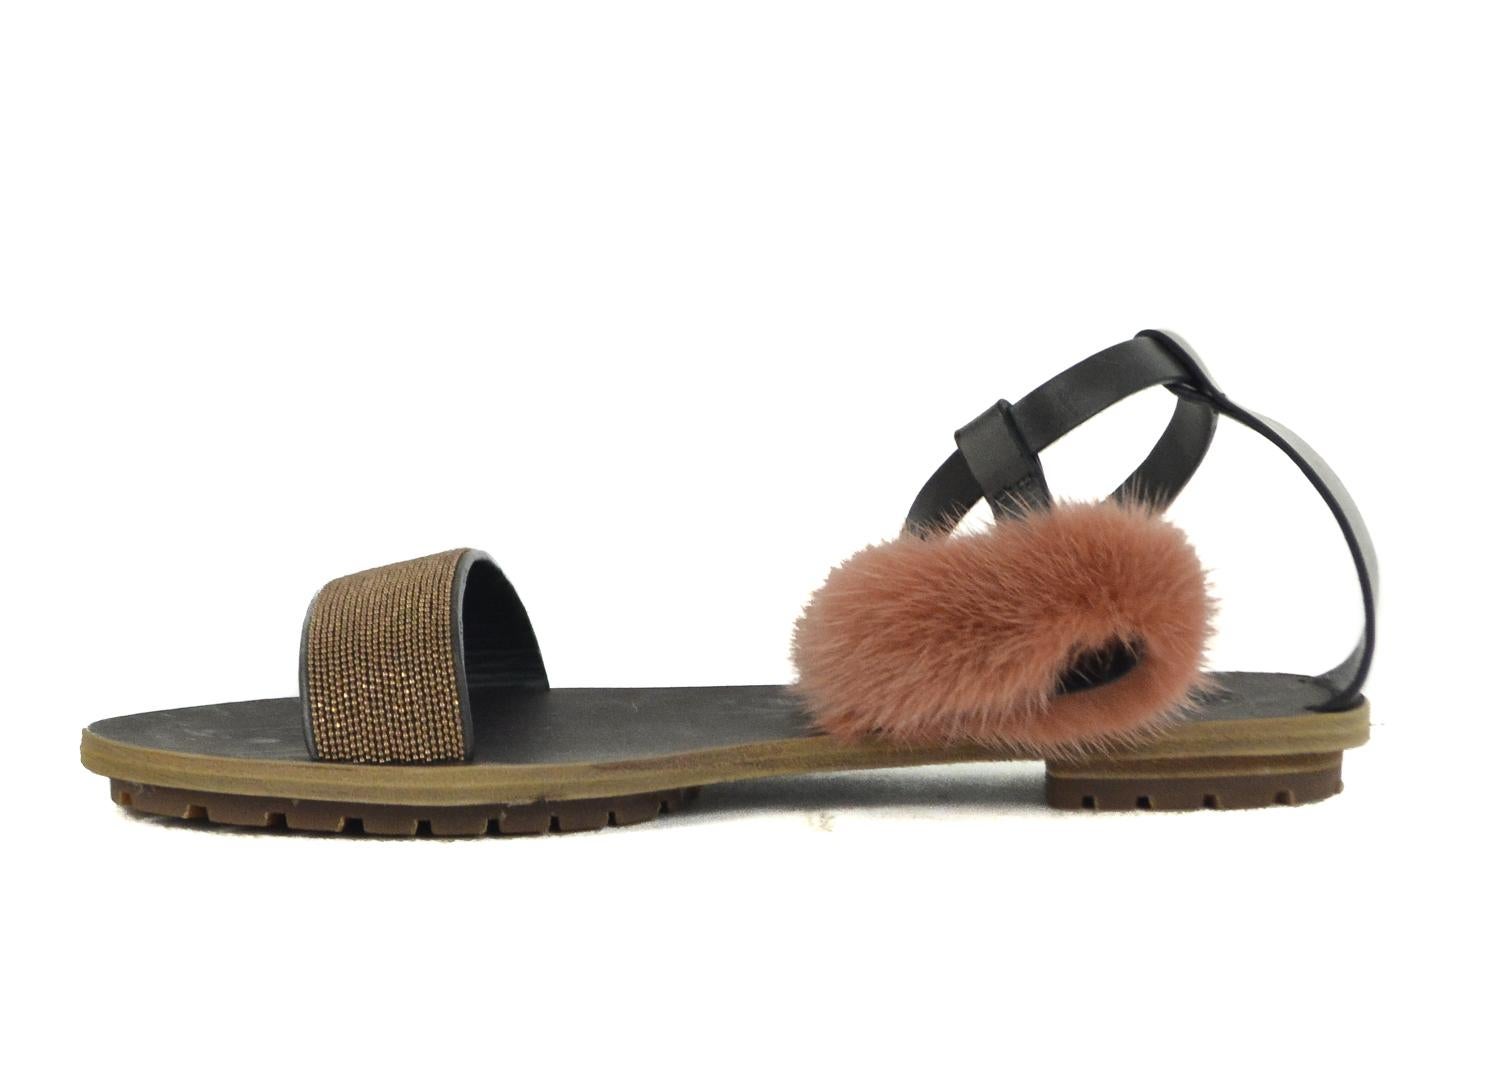 Brunello Cucinelli pink leather flat sandals. These sandals feature a mink fur detailing with an ankle strap buckle fastening. Pair it with a summer dress for a chic everyday look.



Leather
Mink Fur Detailing
Ankle Strap with Buckle